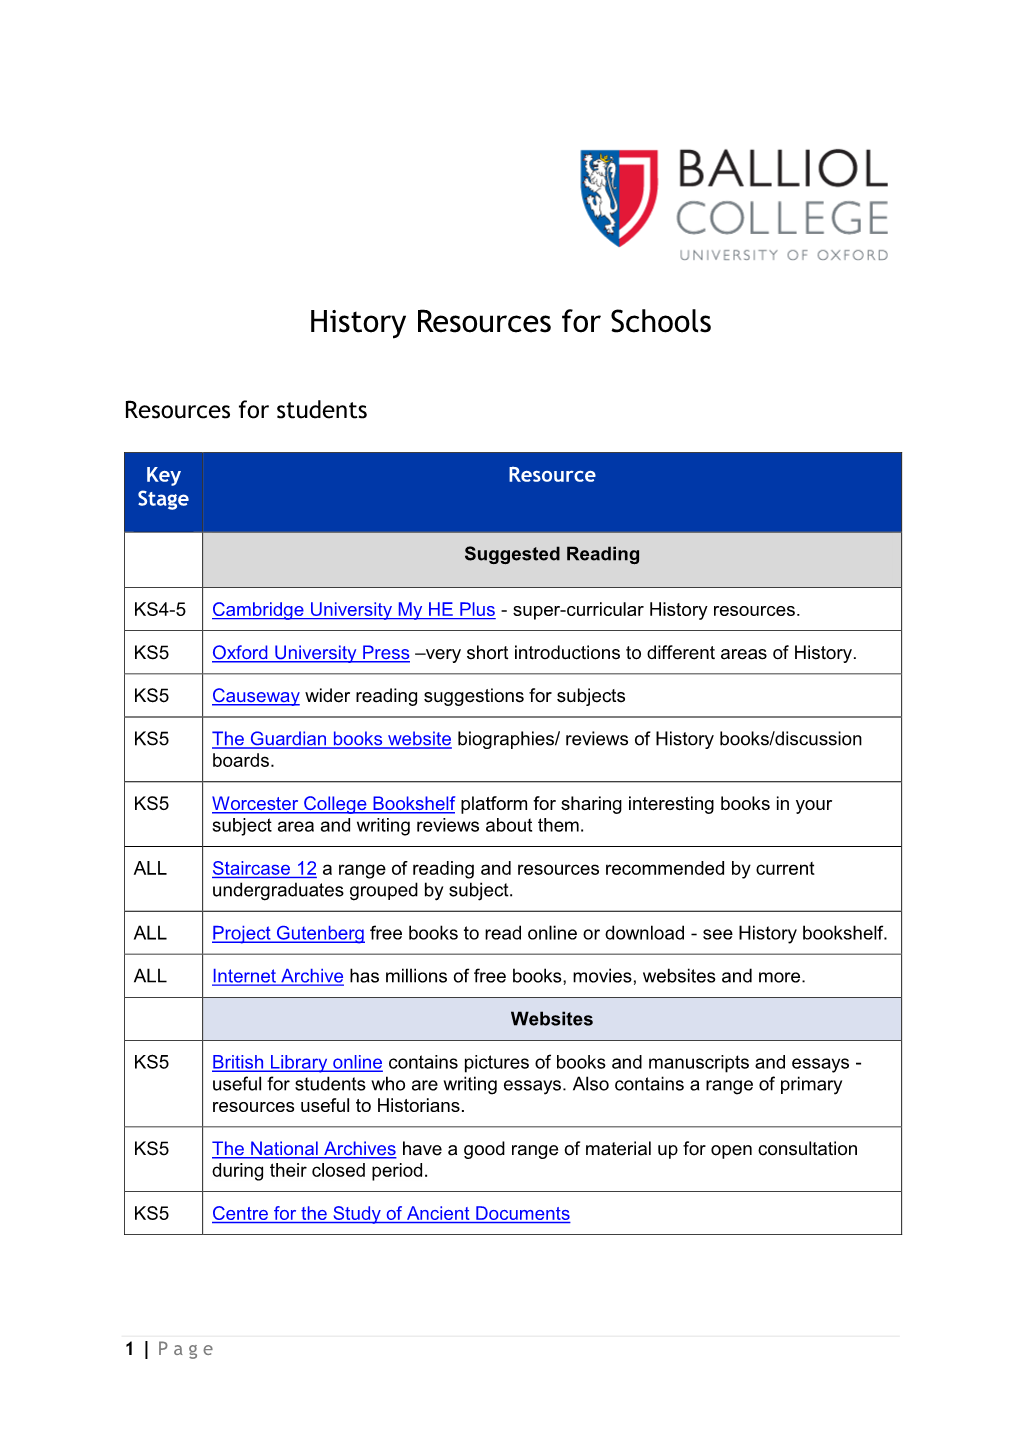 History Resources for Schools